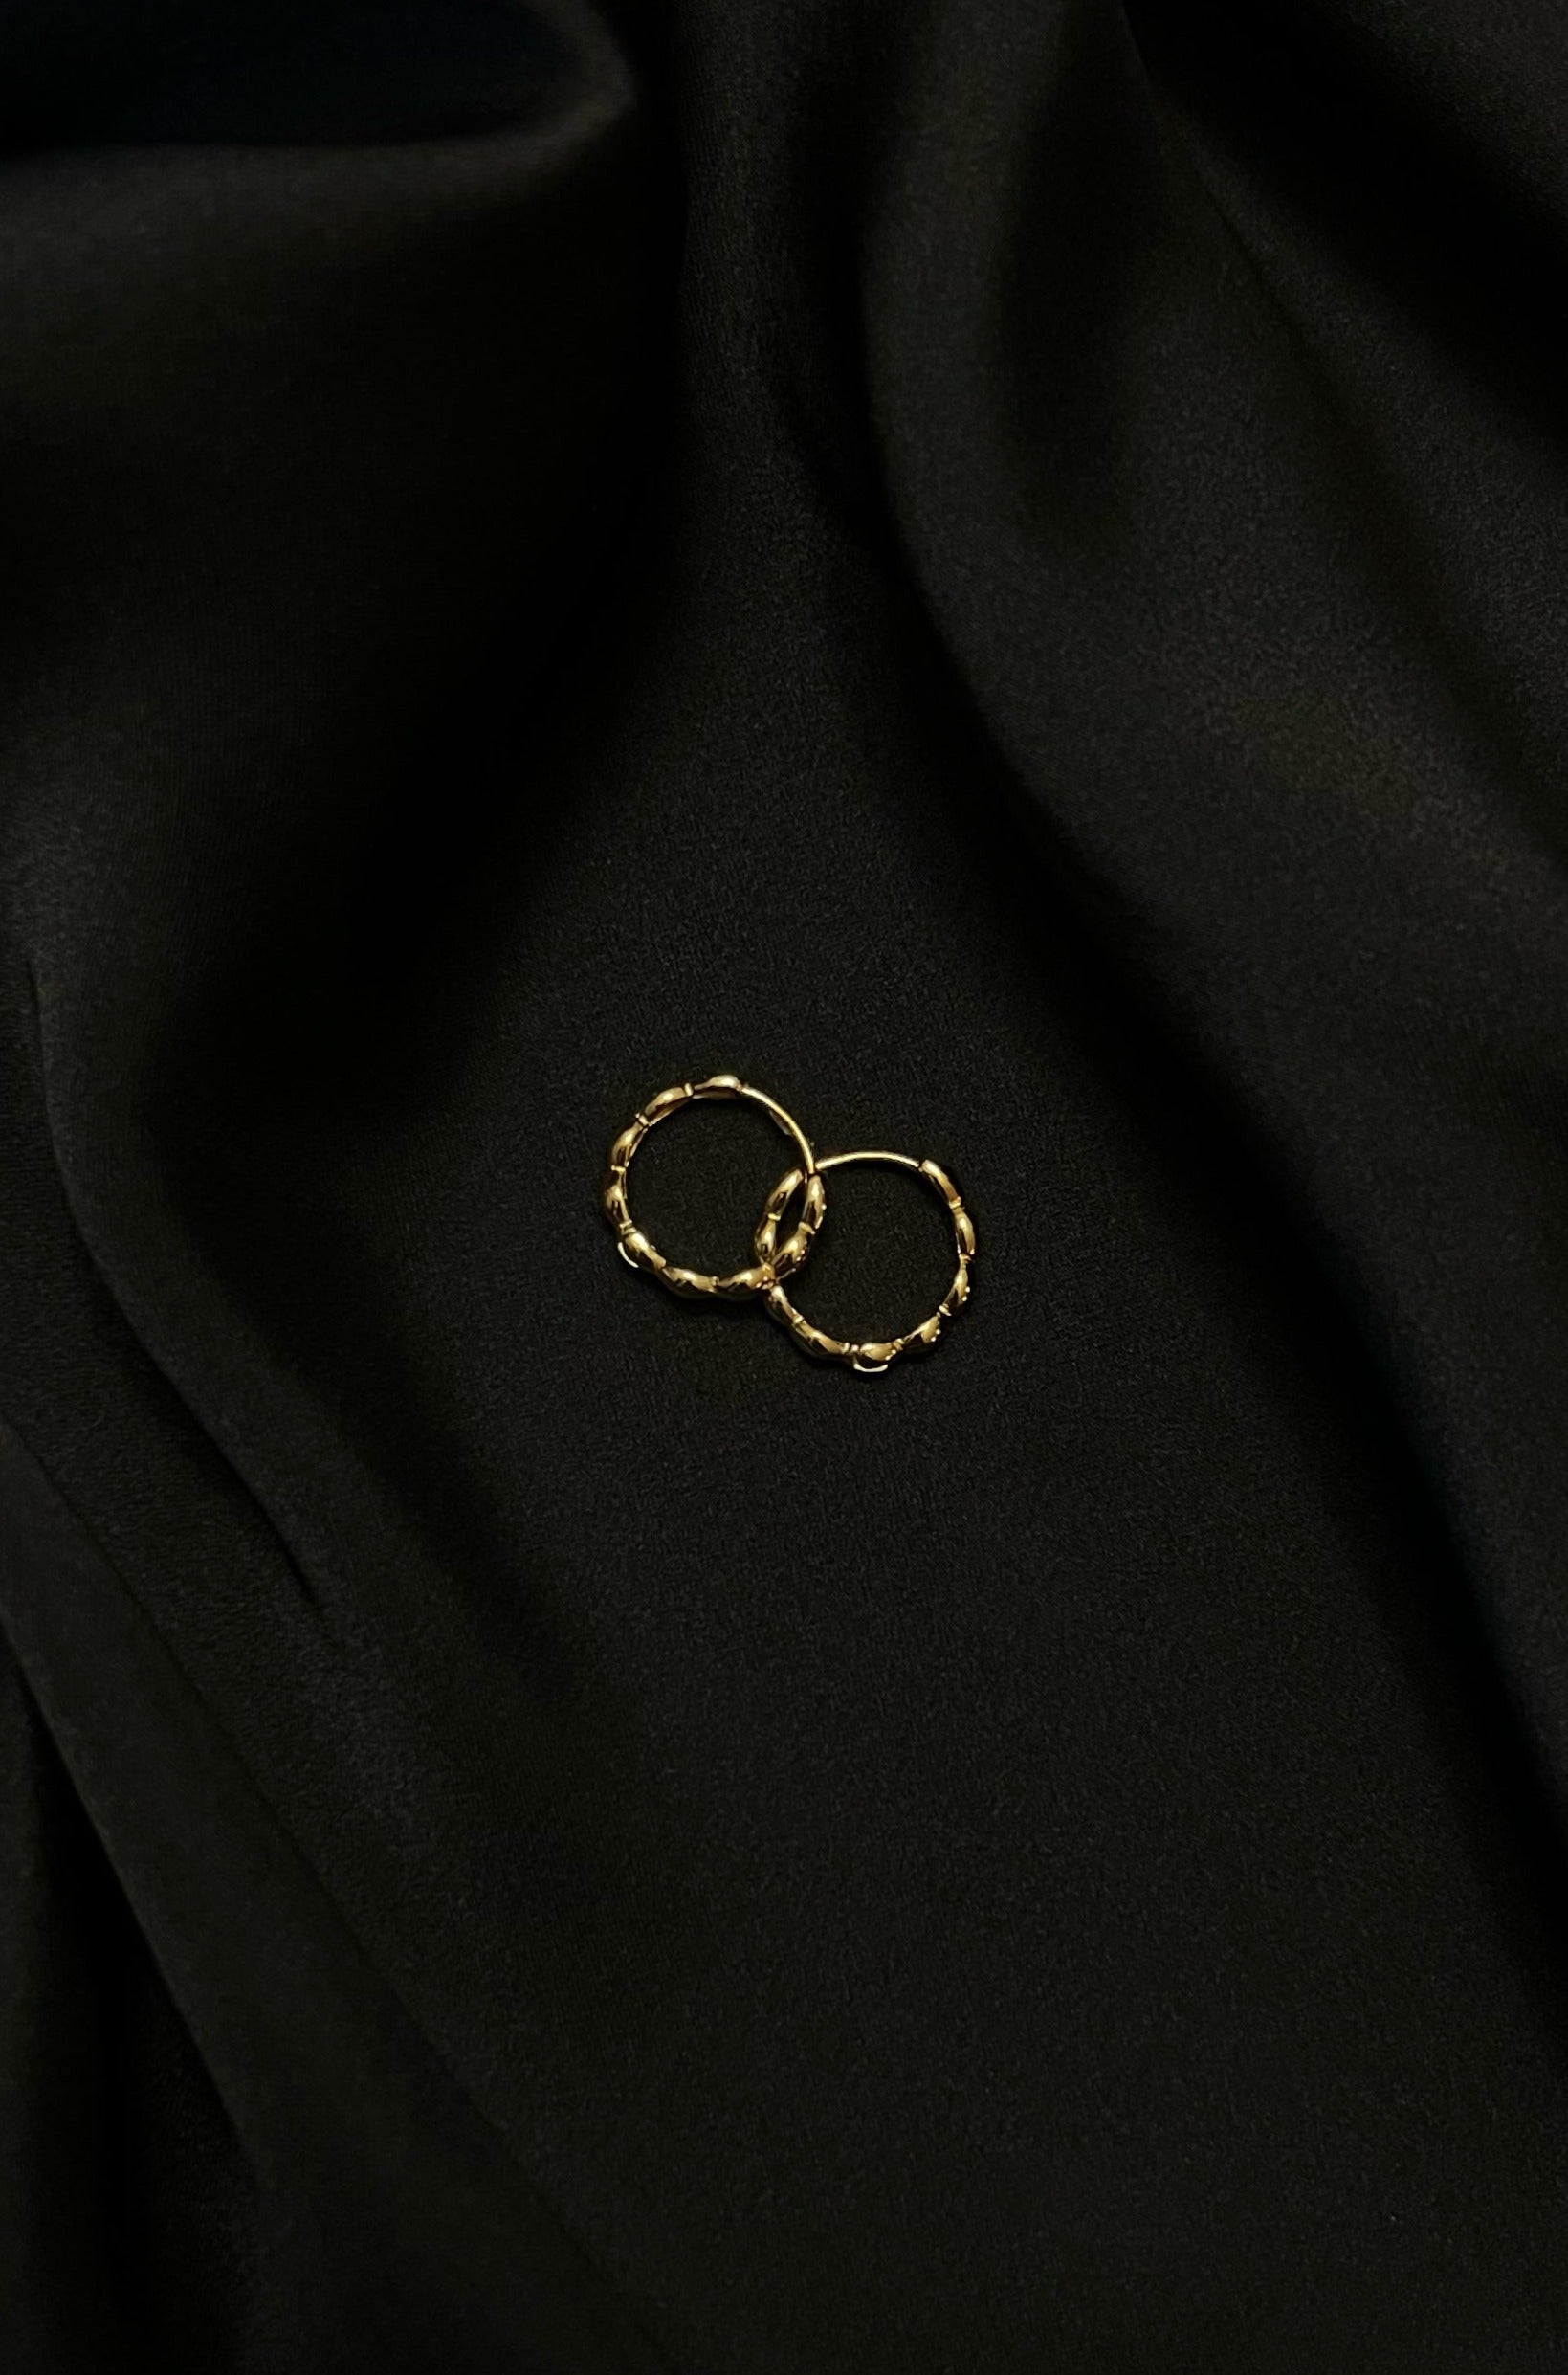 Top view of the Oryza hoops, placed on a black satin fabric.